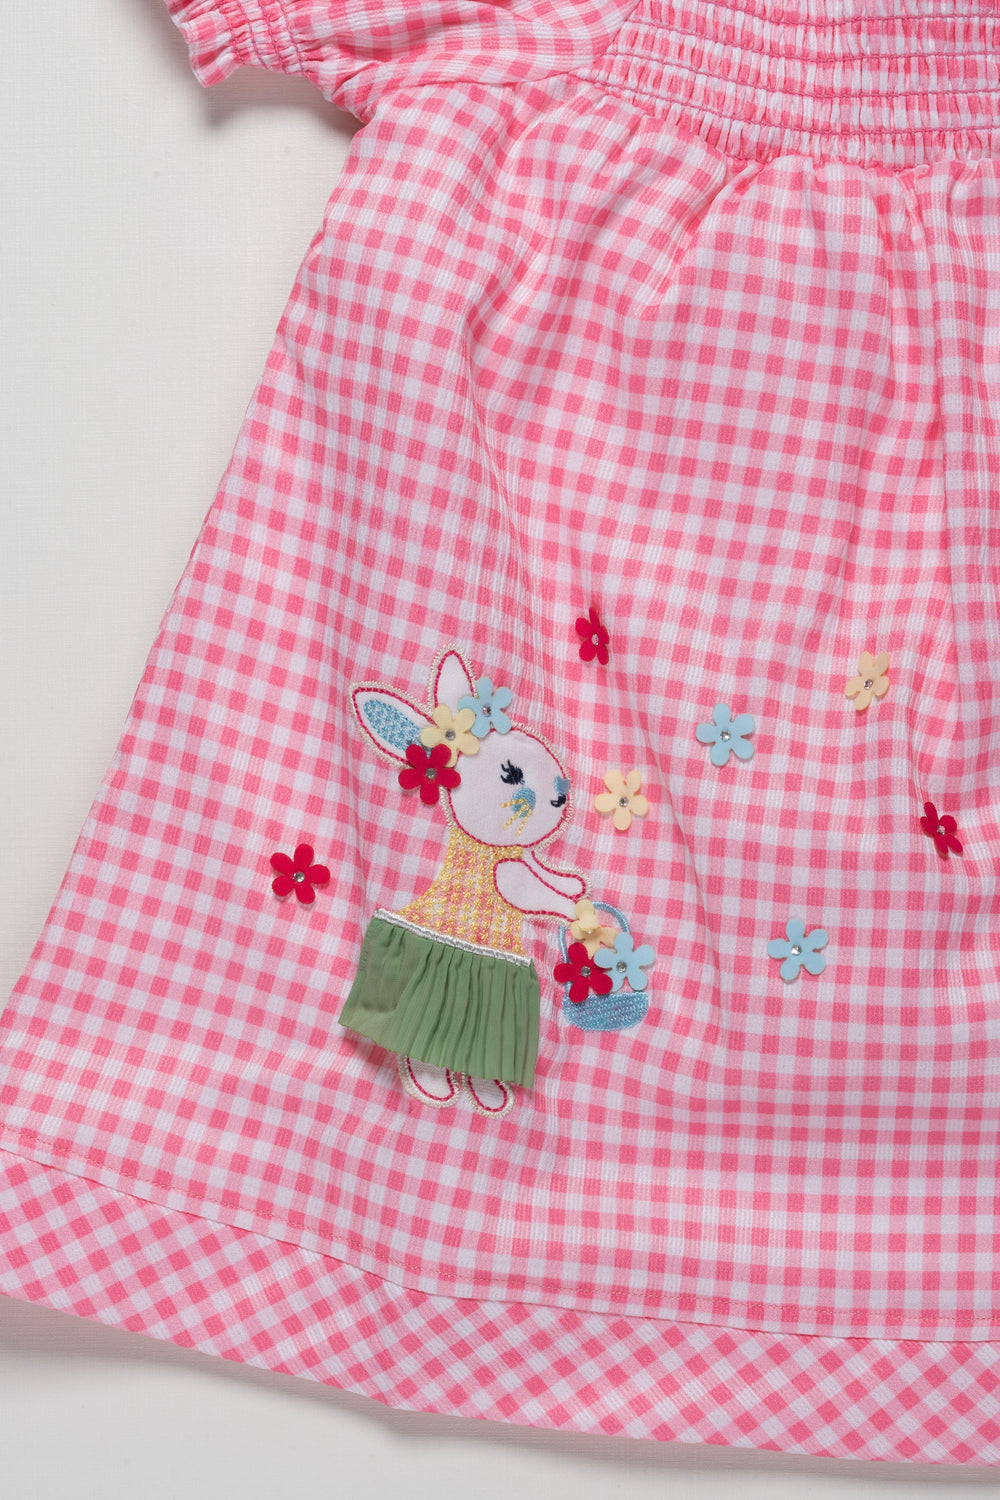 The Nesavu Girls Cotton Frock Delightful Girls Pink Gingham Cotton Frock with Bunny and Flower Embroidery Nesavu Delightful Girls Pink Gingham Cotton Frock with Bunny Embroidery | The Nesavu